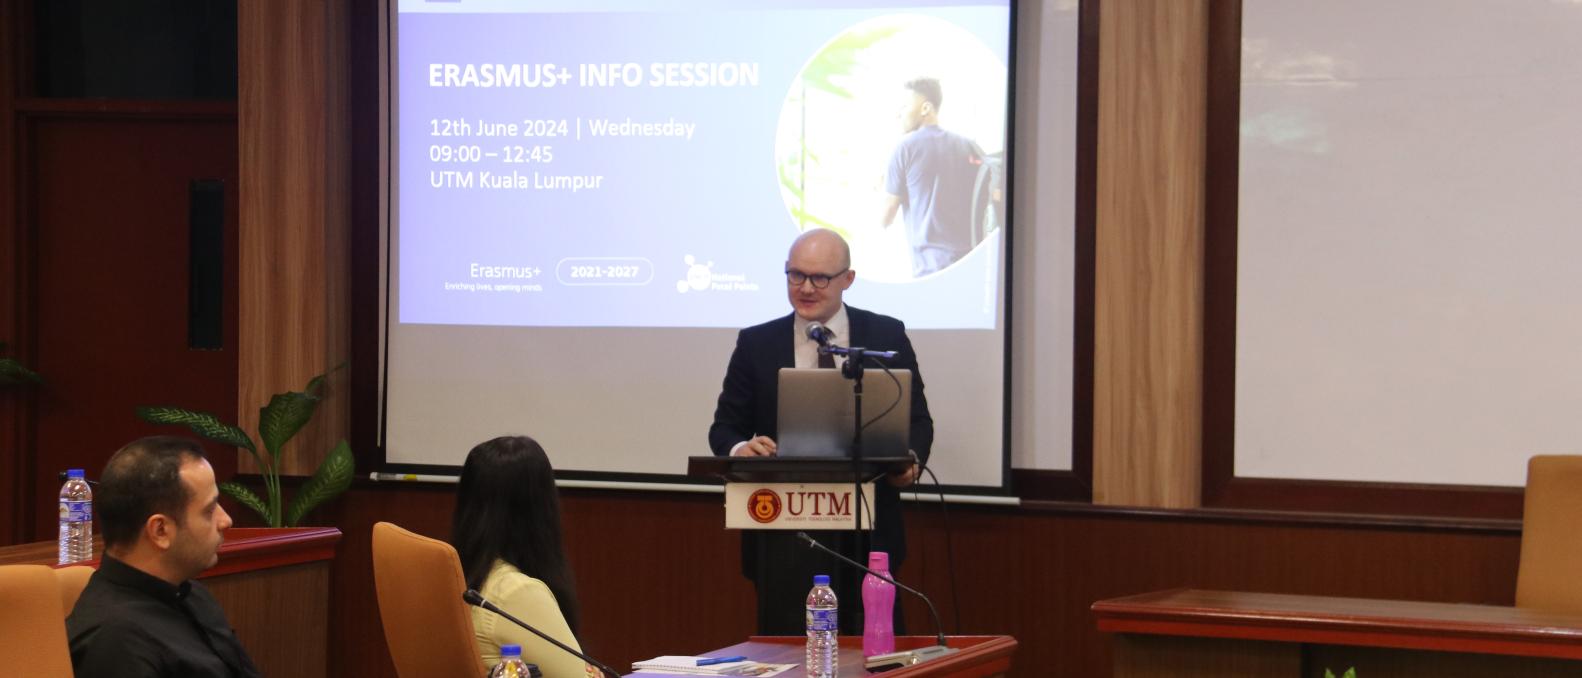 Presentation of Erasmus+ by Political Officer of EU Delegation to Malaysia